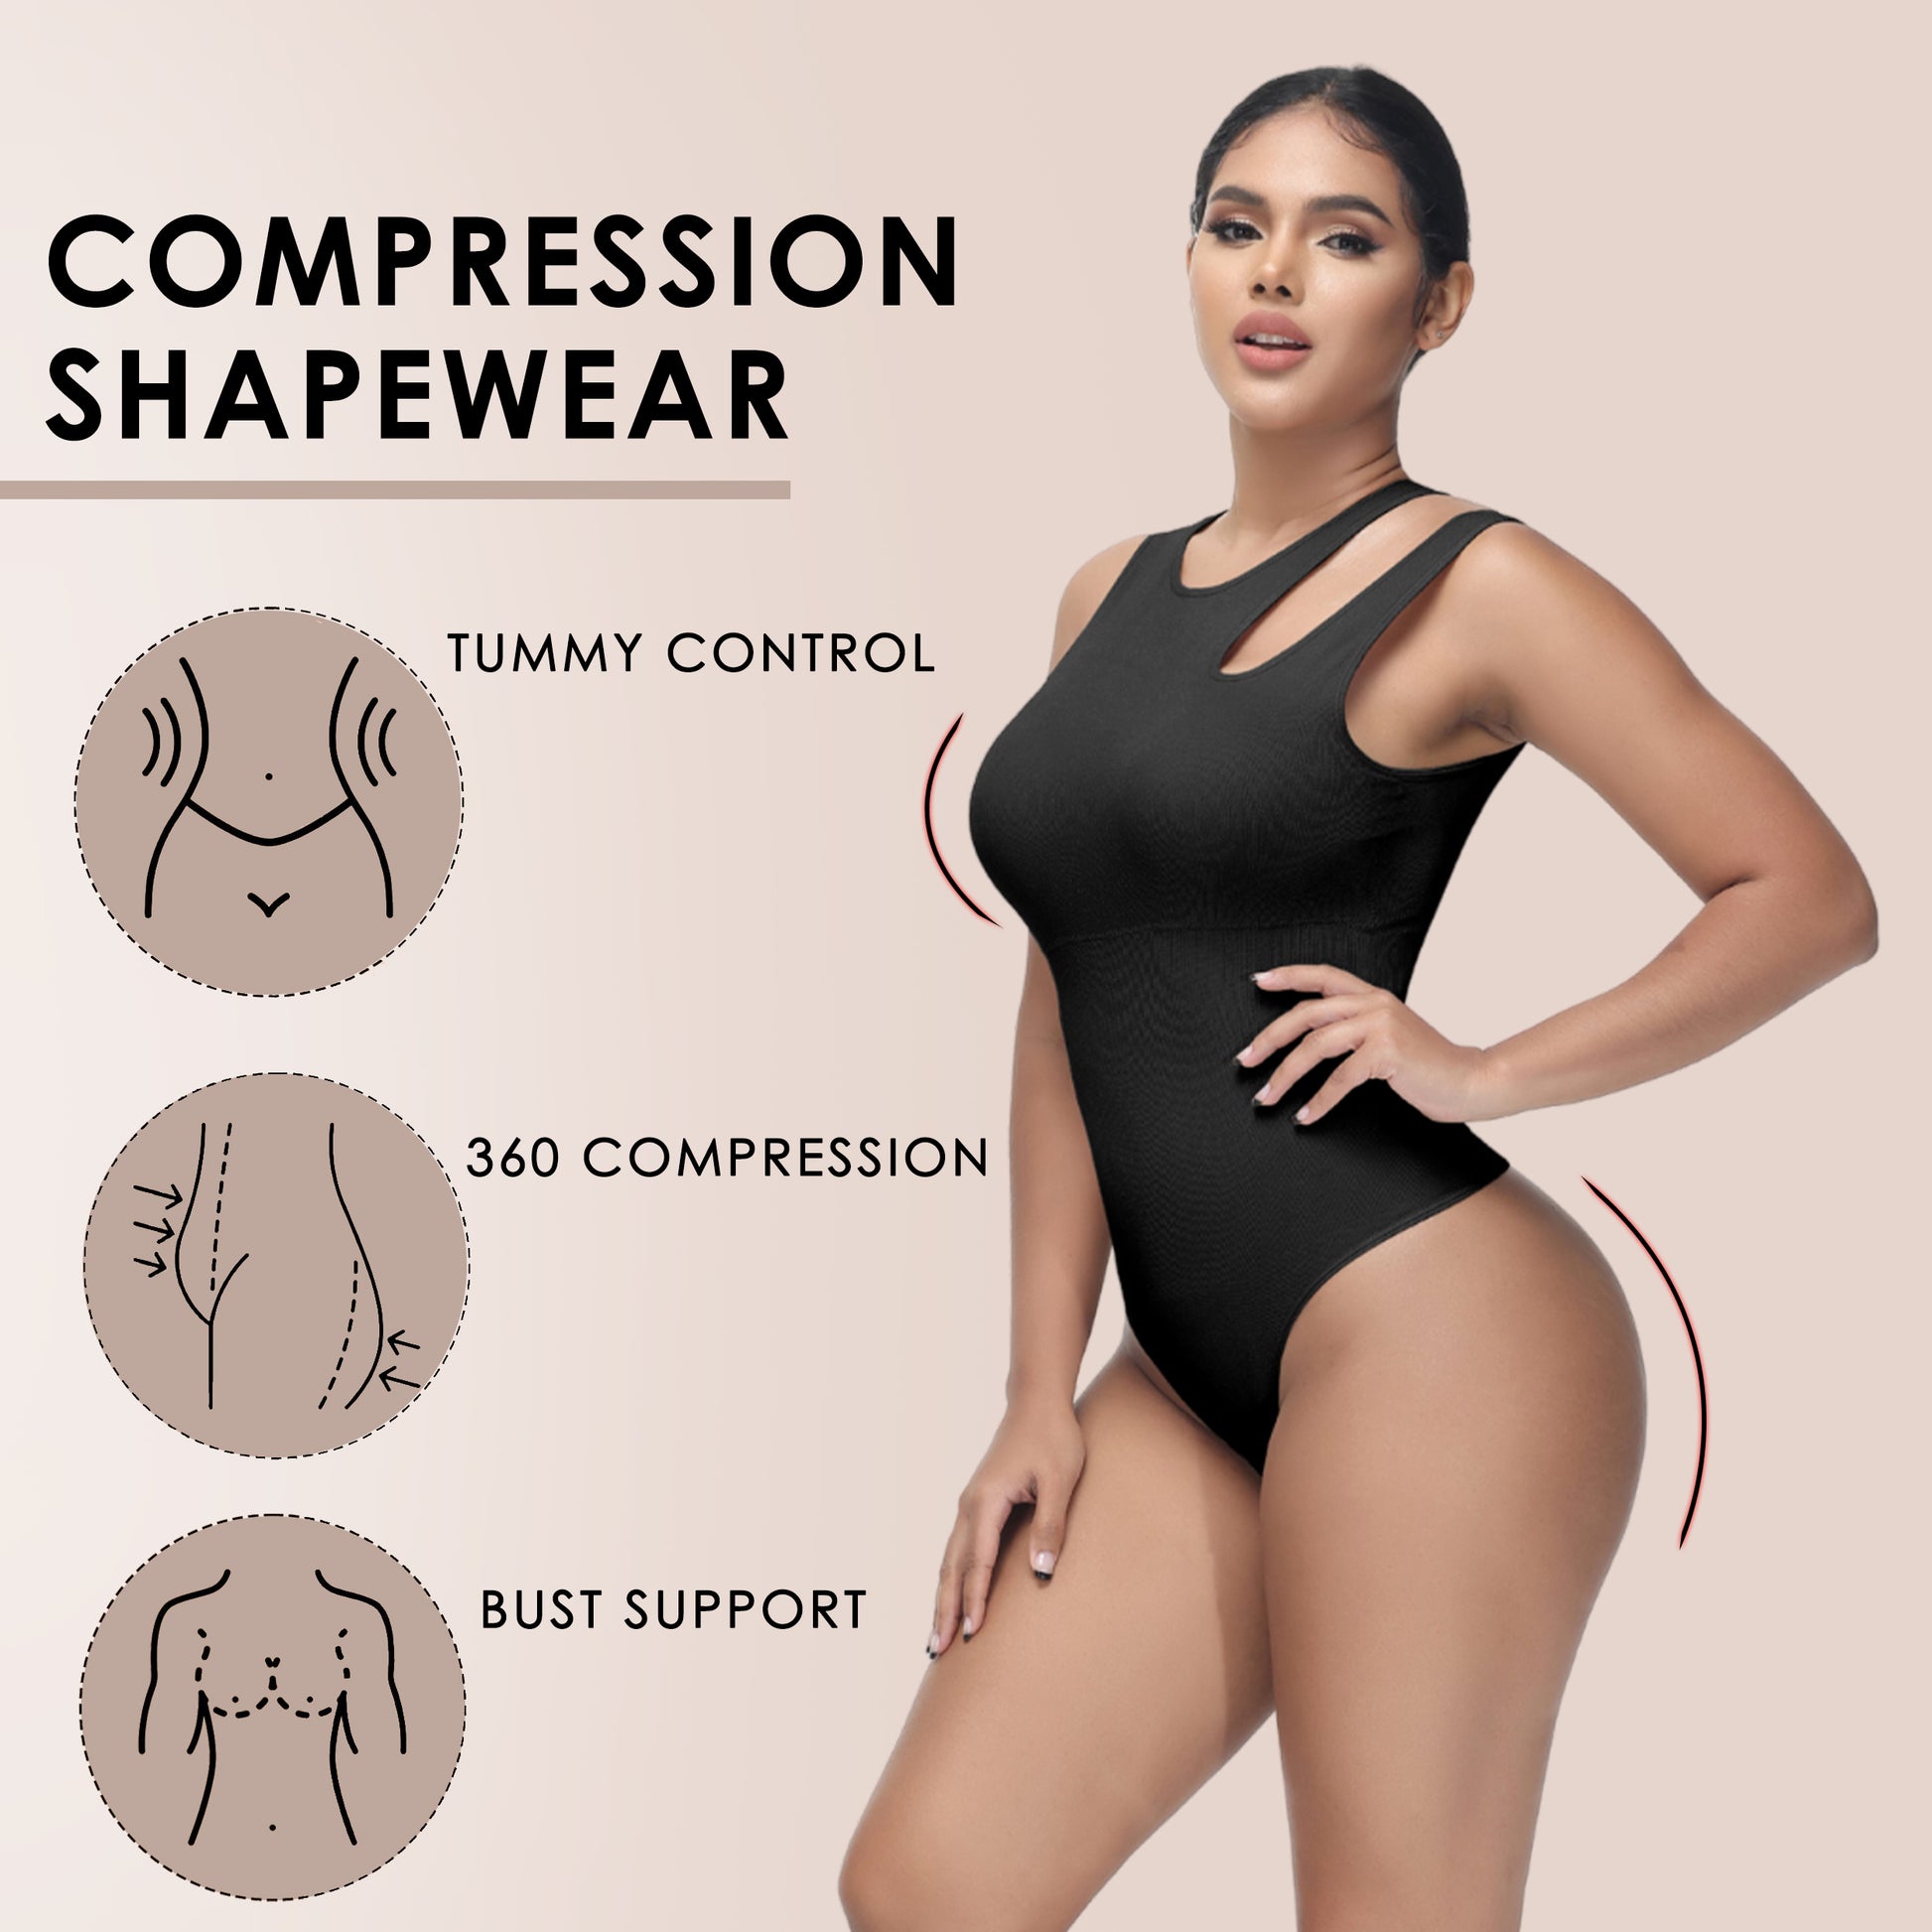 Literally obsessed with these Shapewear bodysuits from @Soo Slick